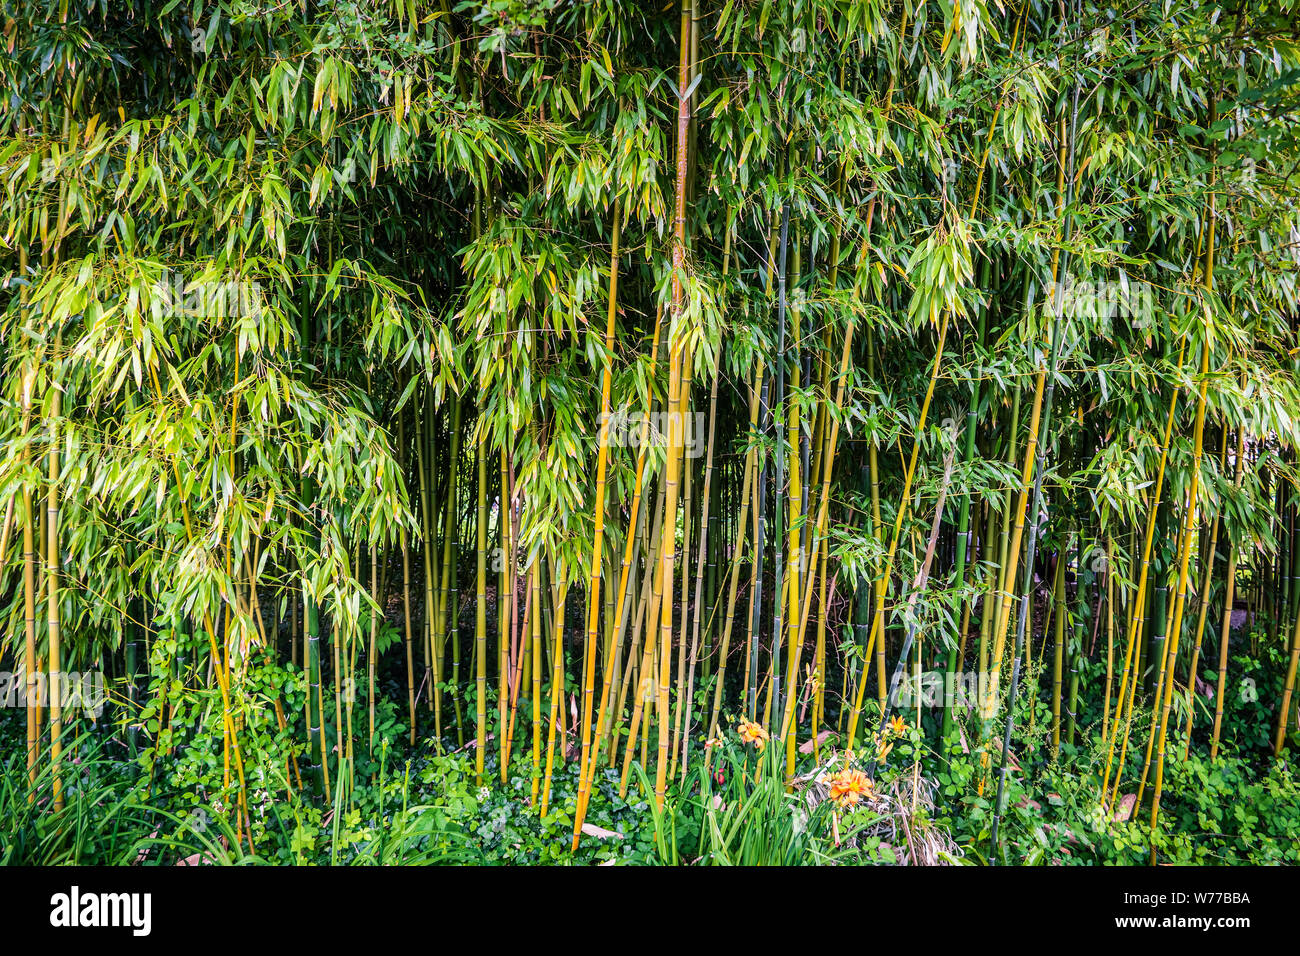 Green bamboo groves or forest with foliage, Bambusoideae Stock Photo